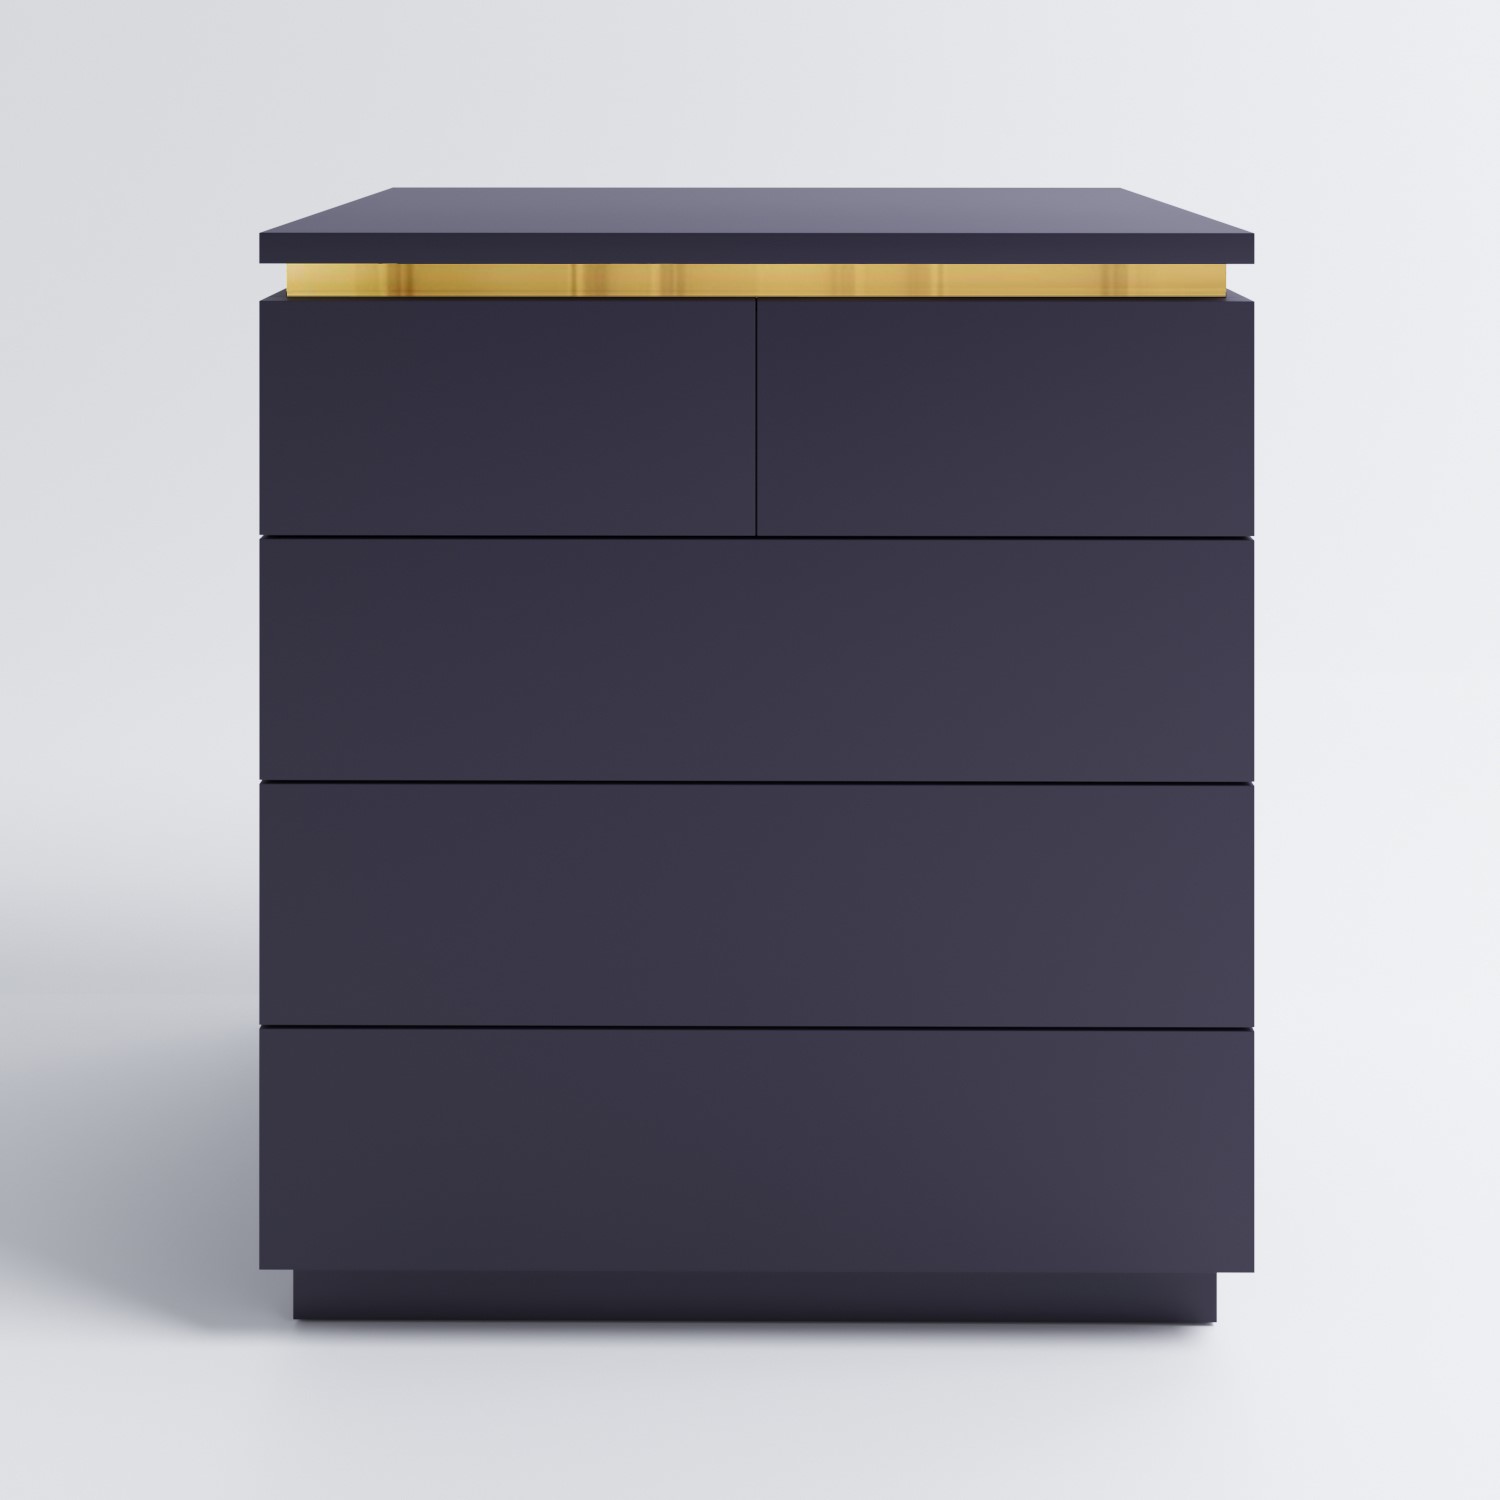 Read more about Navy blue chest of 5 drawers with metallic trim isabella